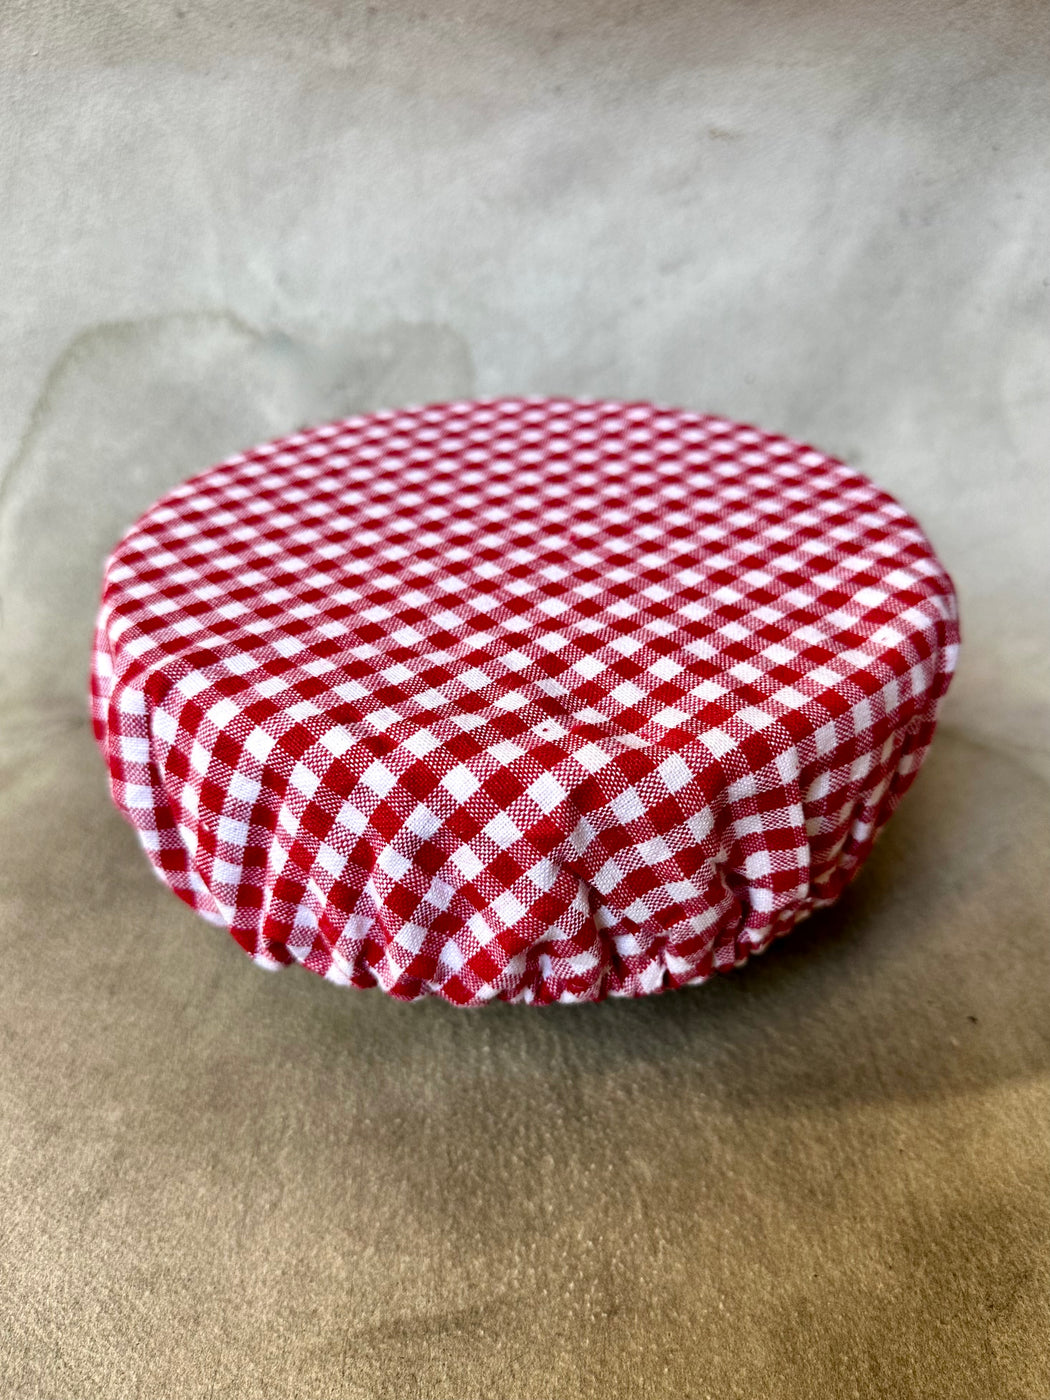 Red Gingham Bowl Covers